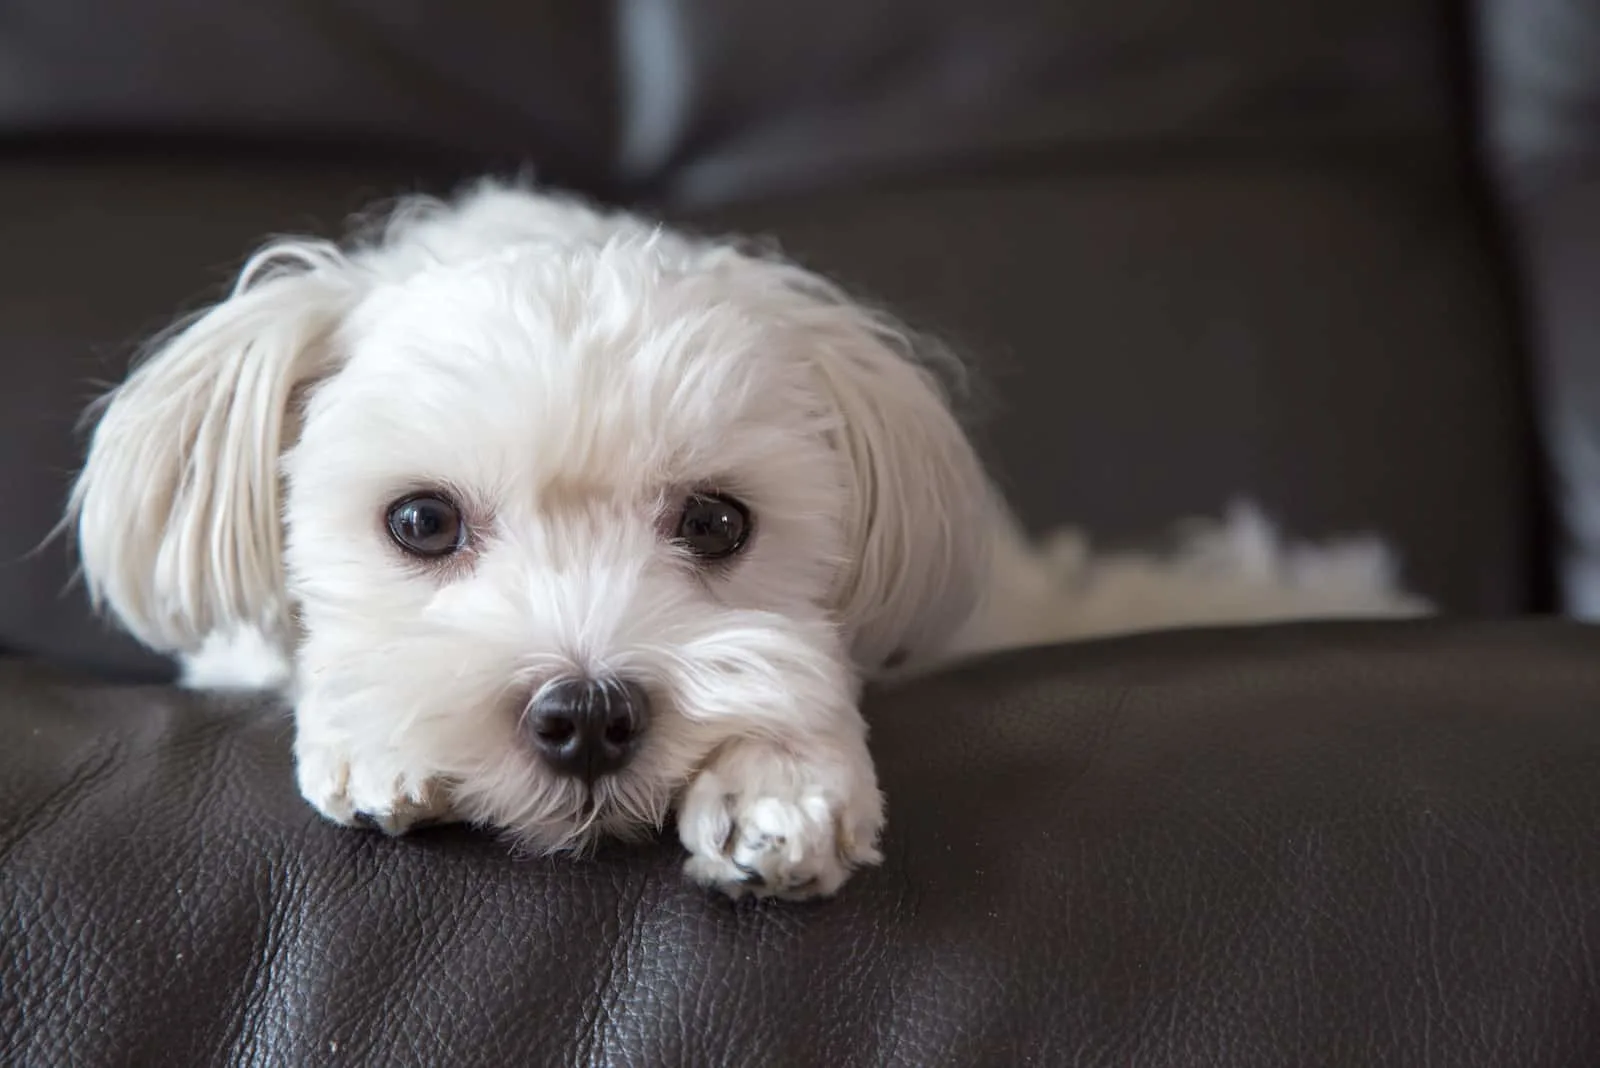 Cute Maltese laying down on black leather sofa